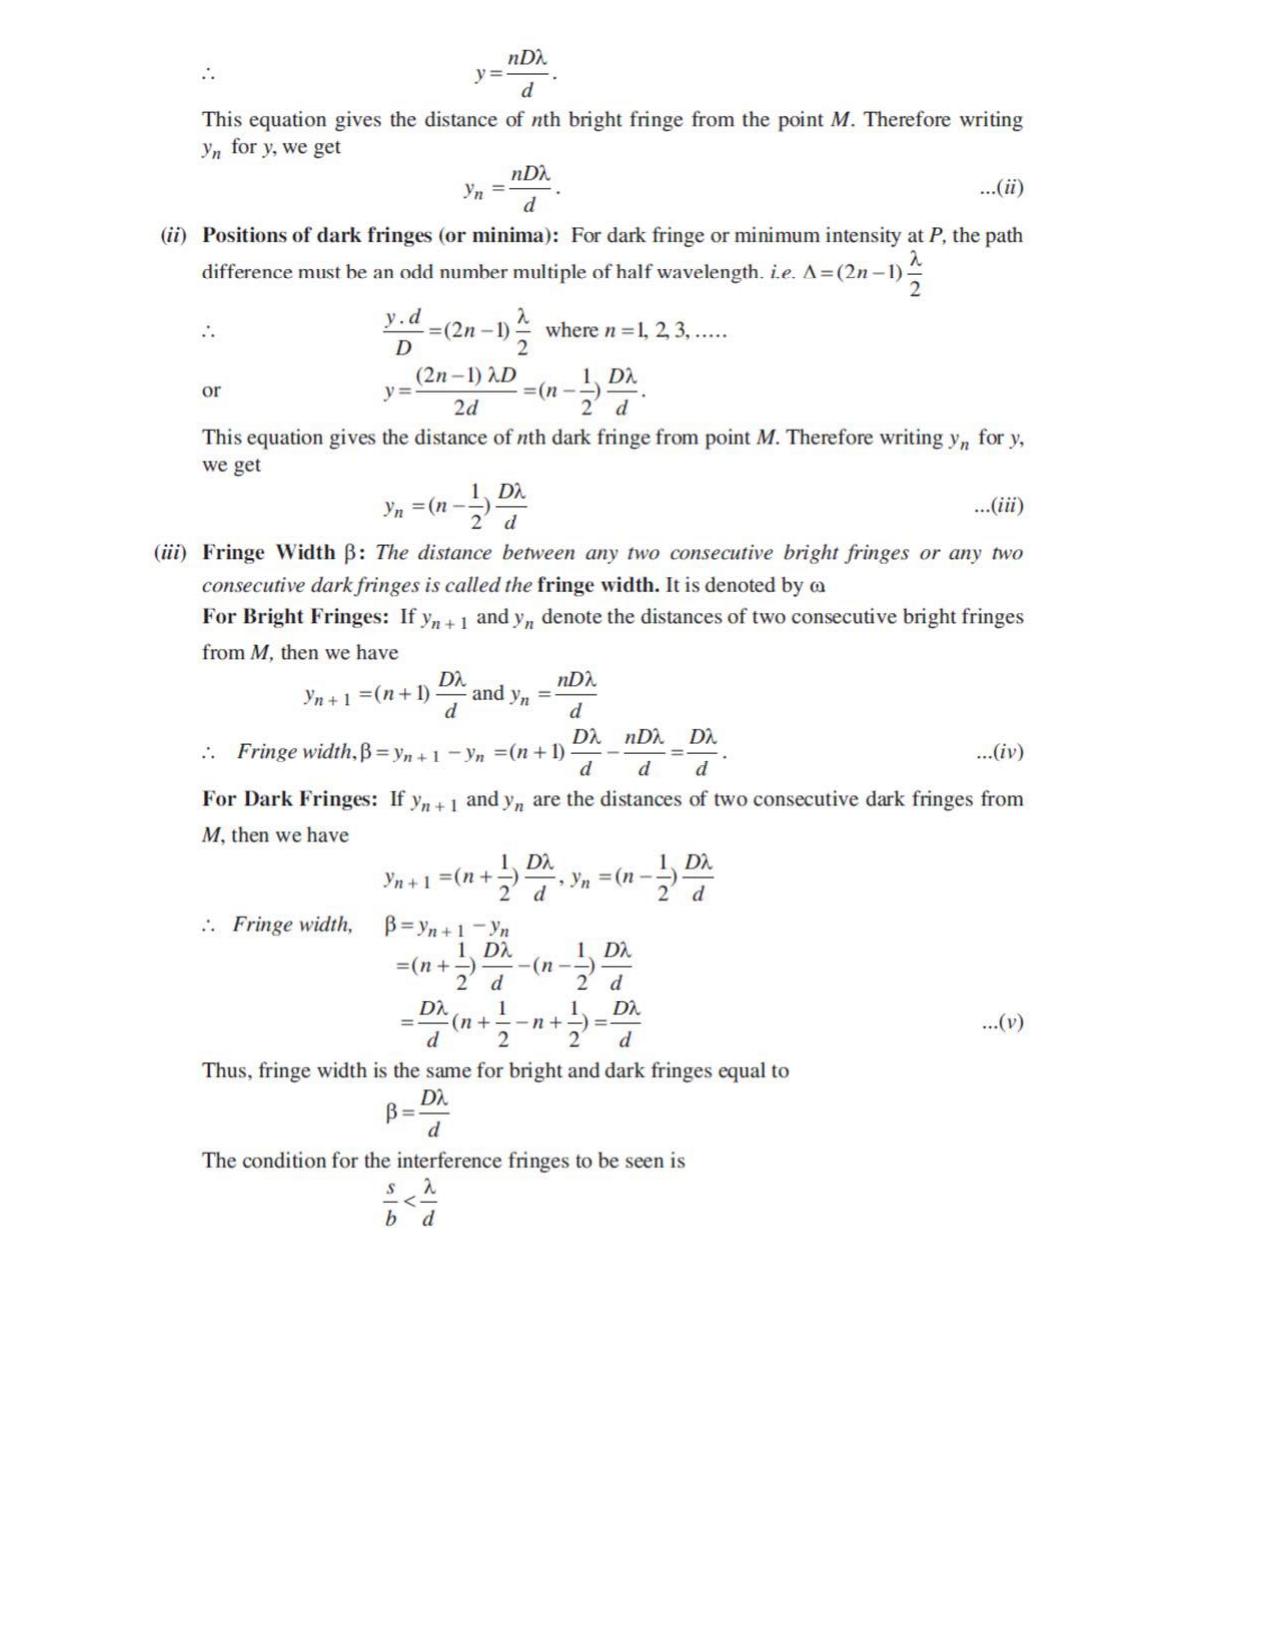 CBSE Class 12 Physics Worksheets for Optics - Page 15